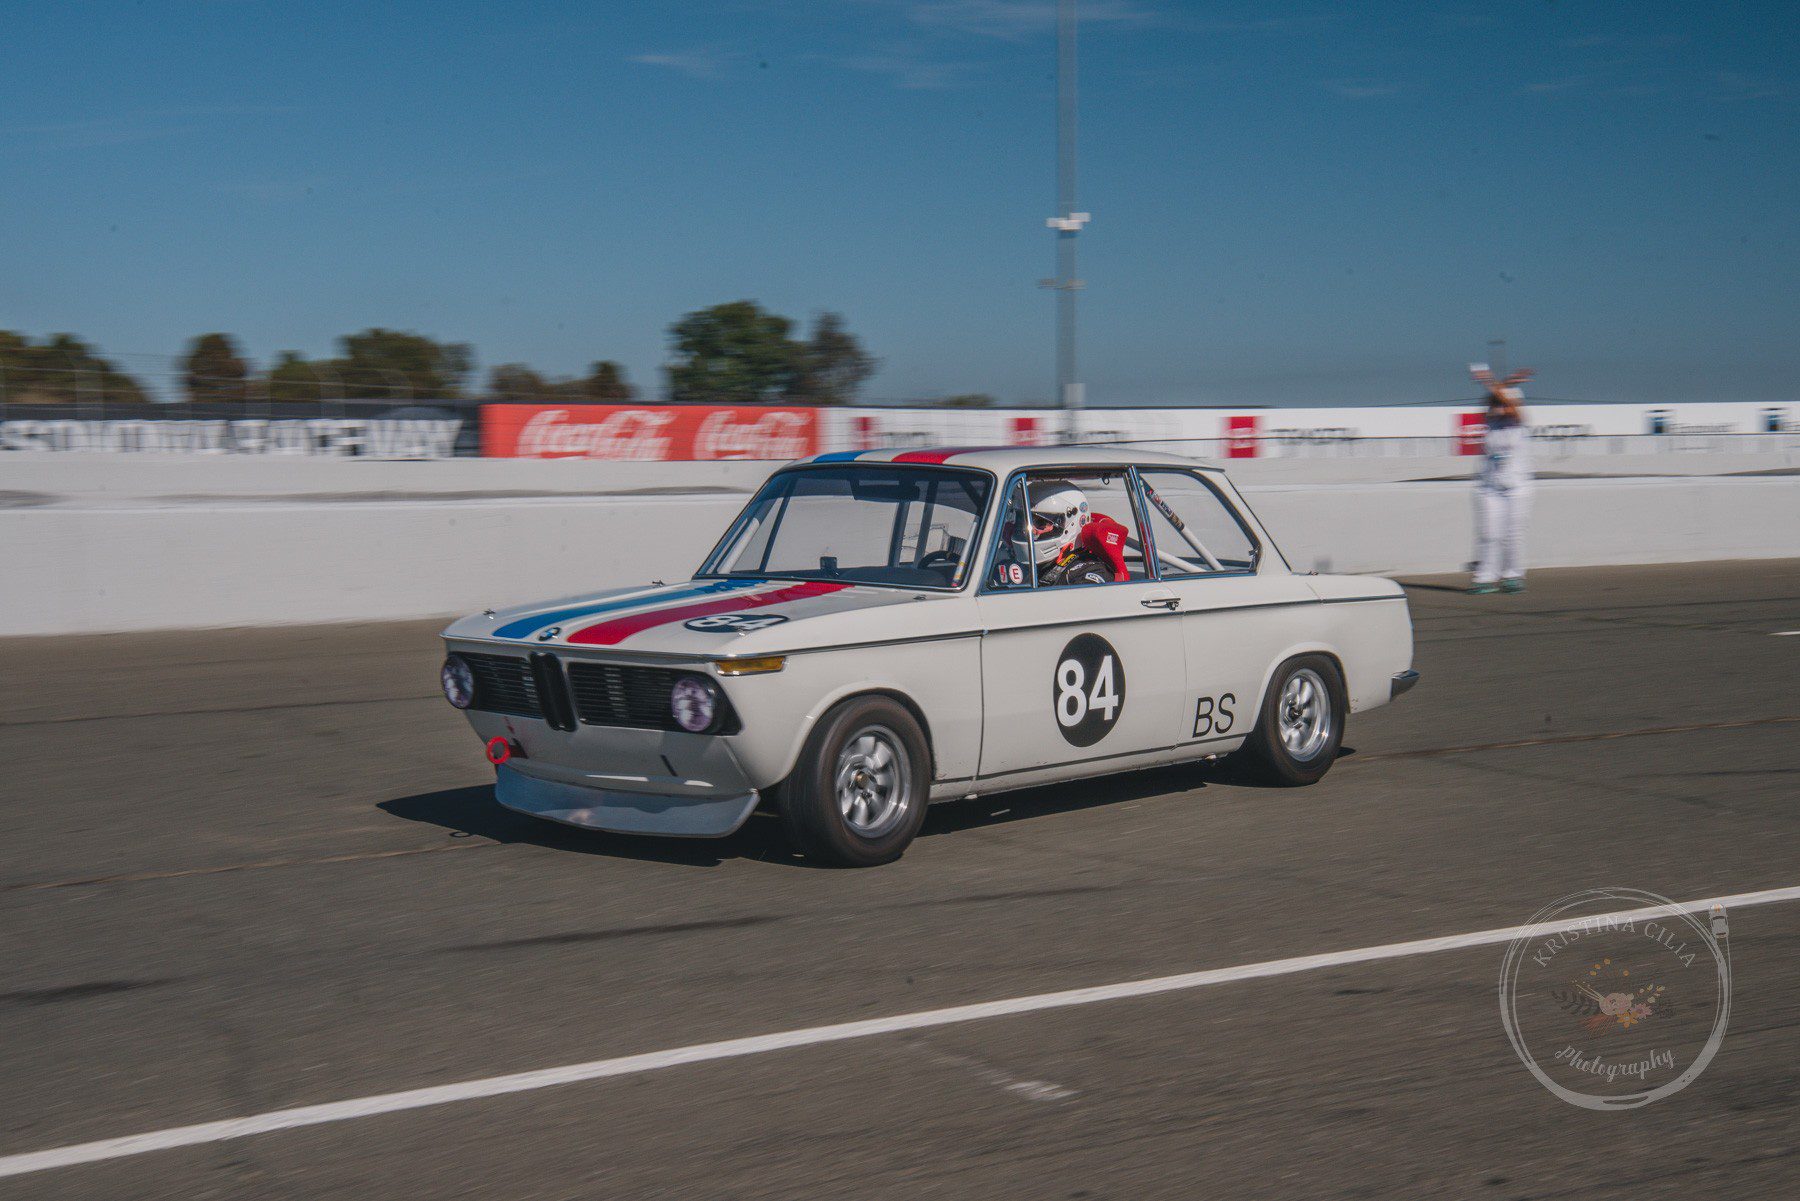 David Buchanan leaves the pits in his 1970 Datsun 510 for the Group 9 race